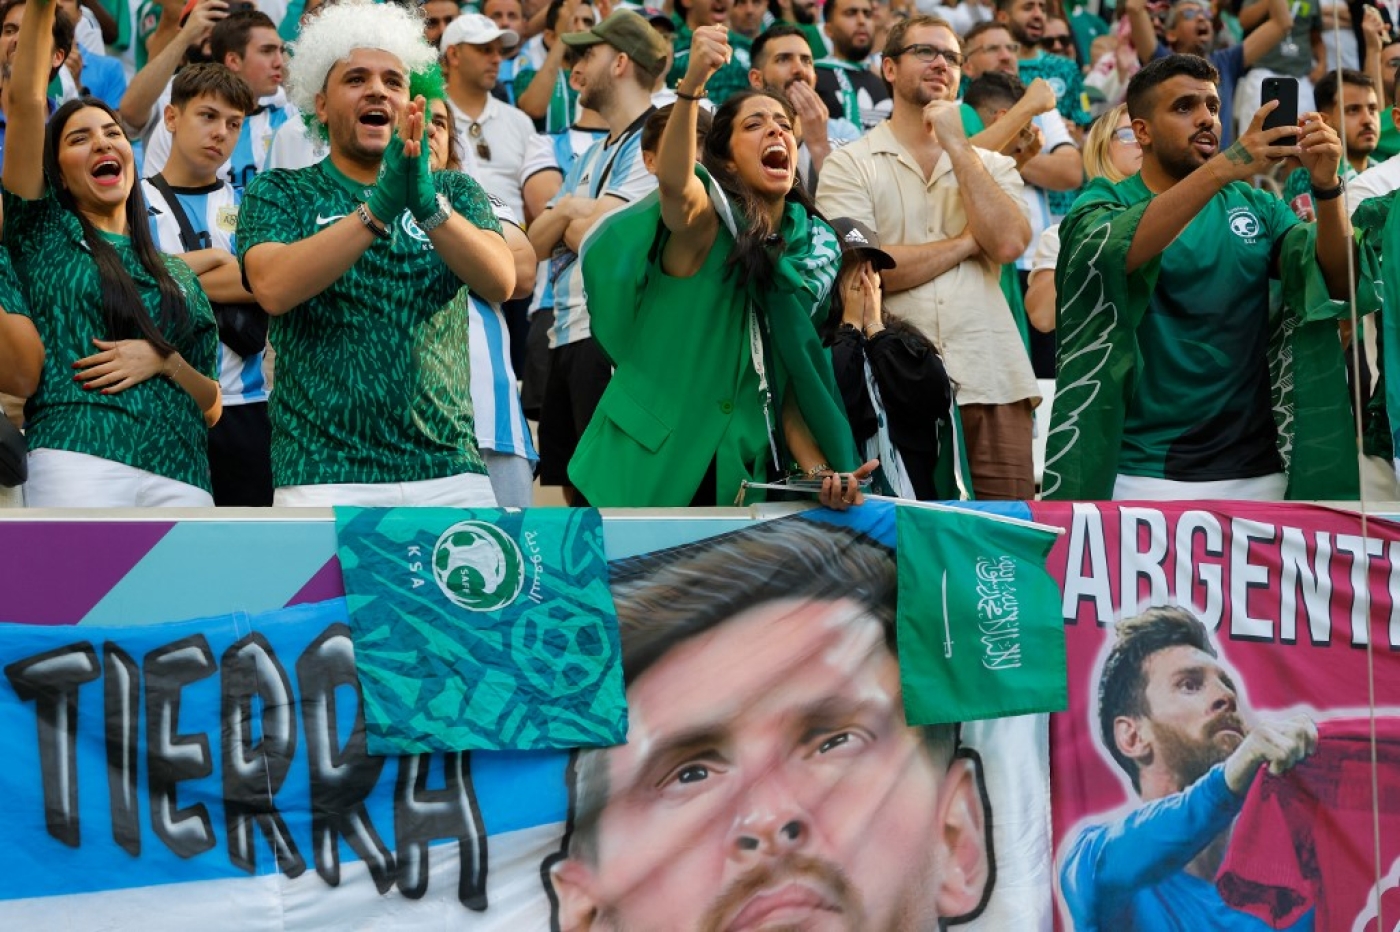 Saudi Arabia fans celebrate their team's victory during the Qatar 2022 World Cup Group C match between Argentina and Saudi Arabia at the Lusail Stadium, north of Doha, on 22 November 2022 (AFP)